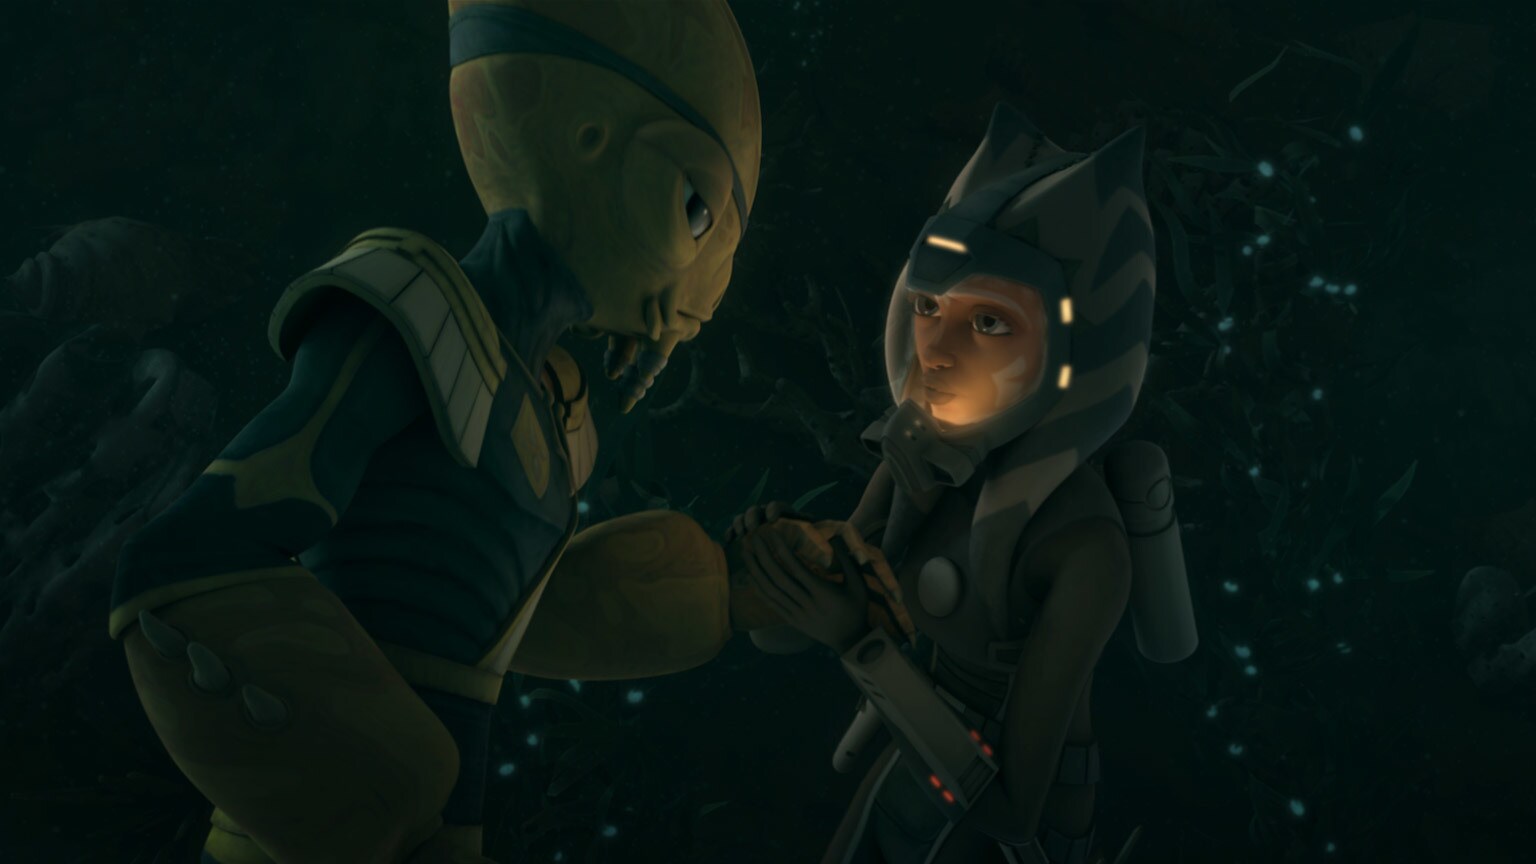 The Clone Wars Rewatch: Watch Out for the "Gungan Attack"